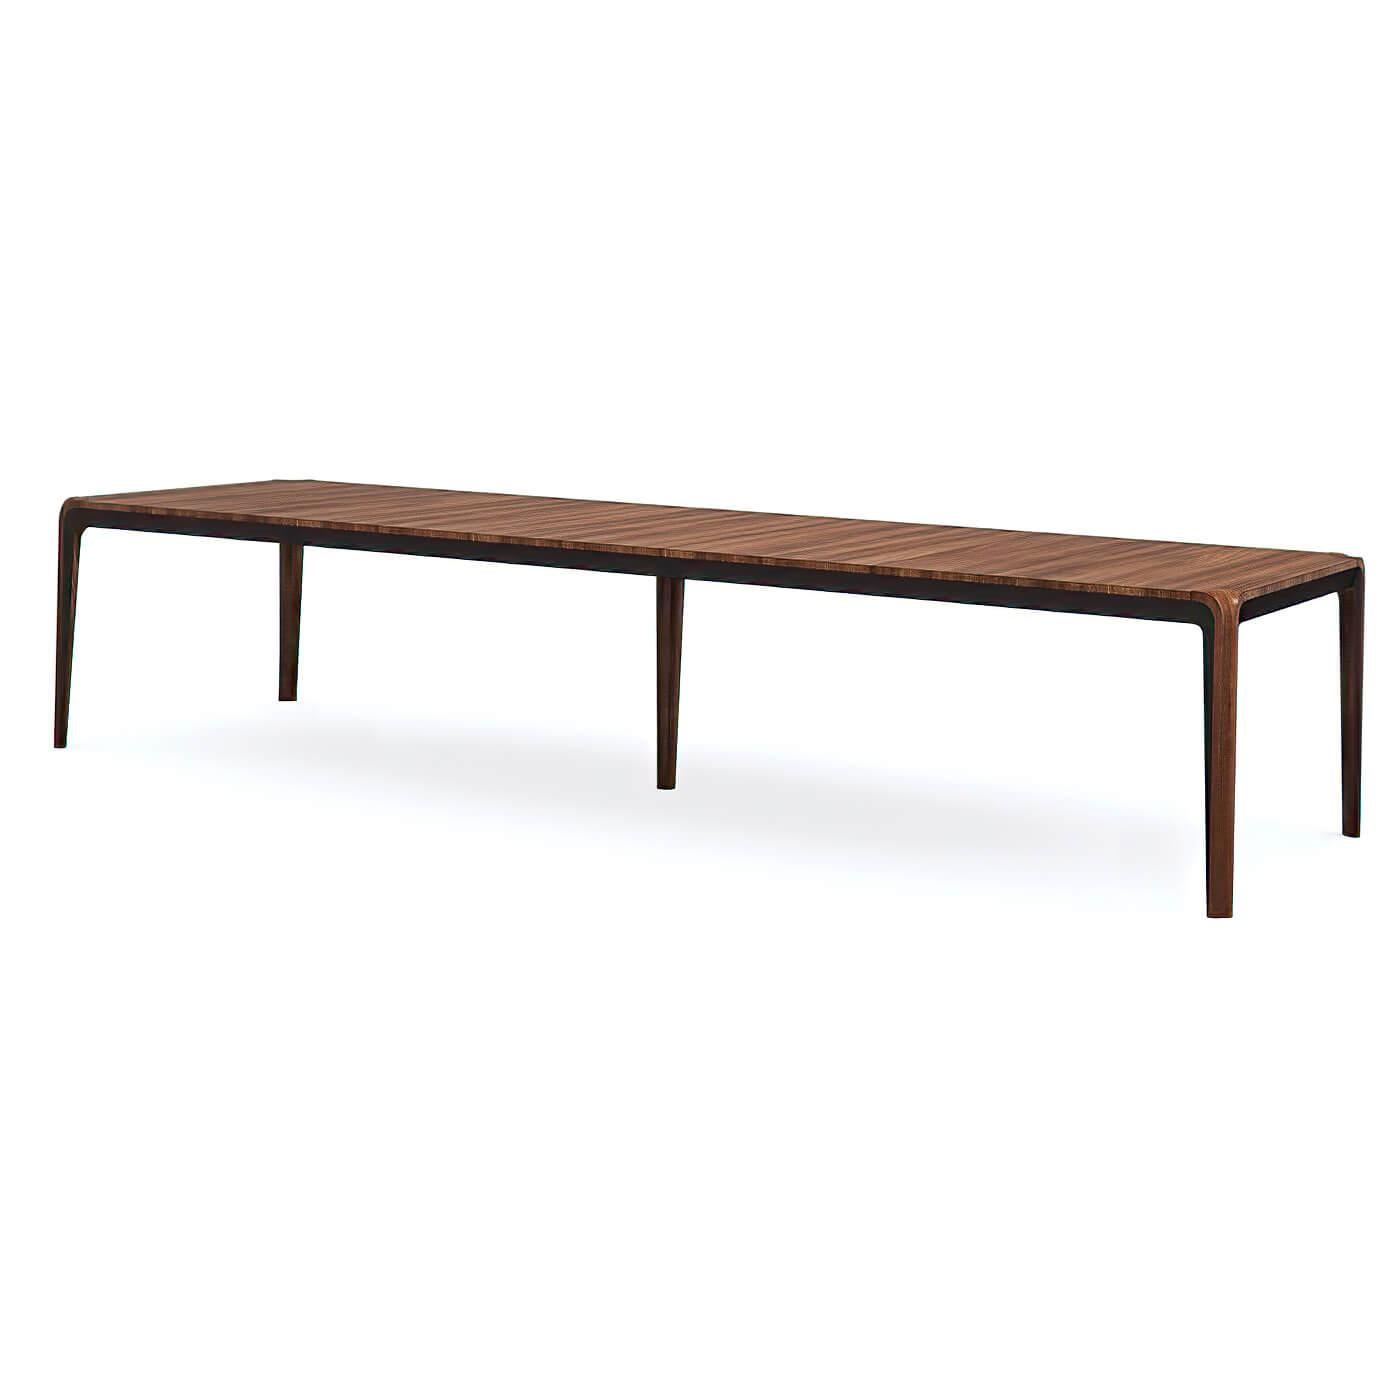 Asian Mid-Century Modern Walnut Extending Dining Table For Sale